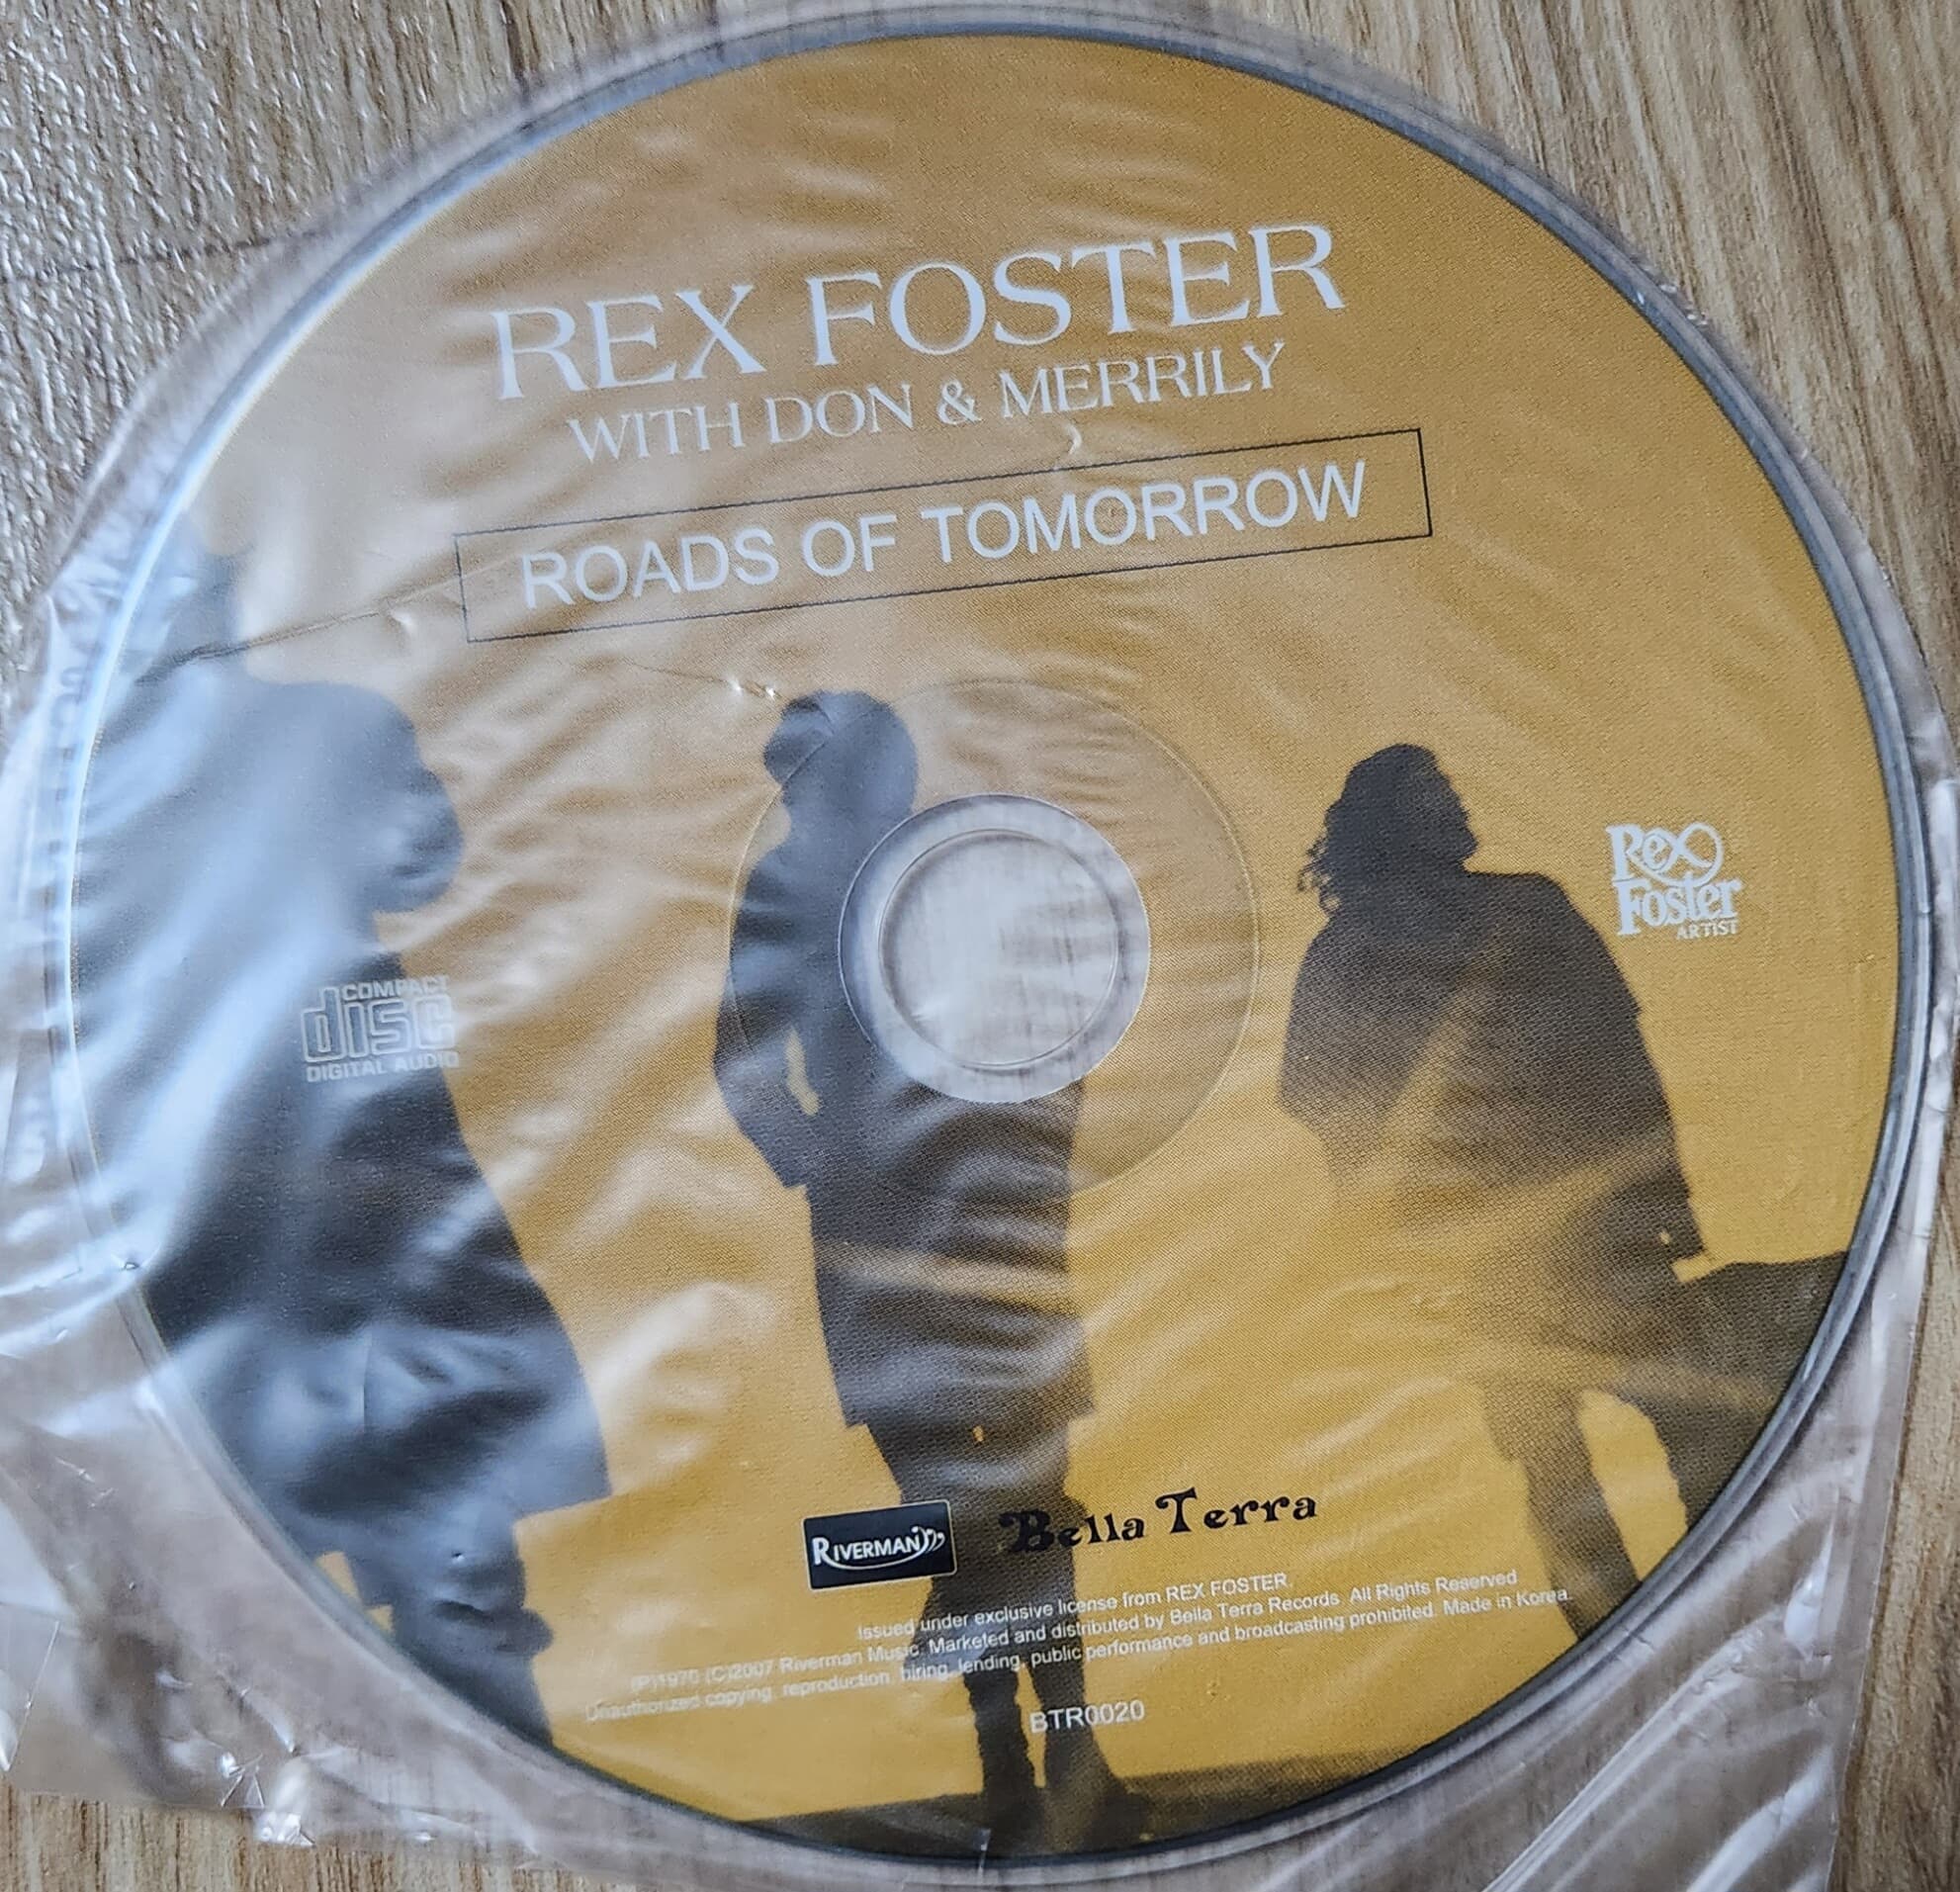 Rex Foster with don&merrily -Roads Of Tomorrow (Remastered, LP Miniature)+2